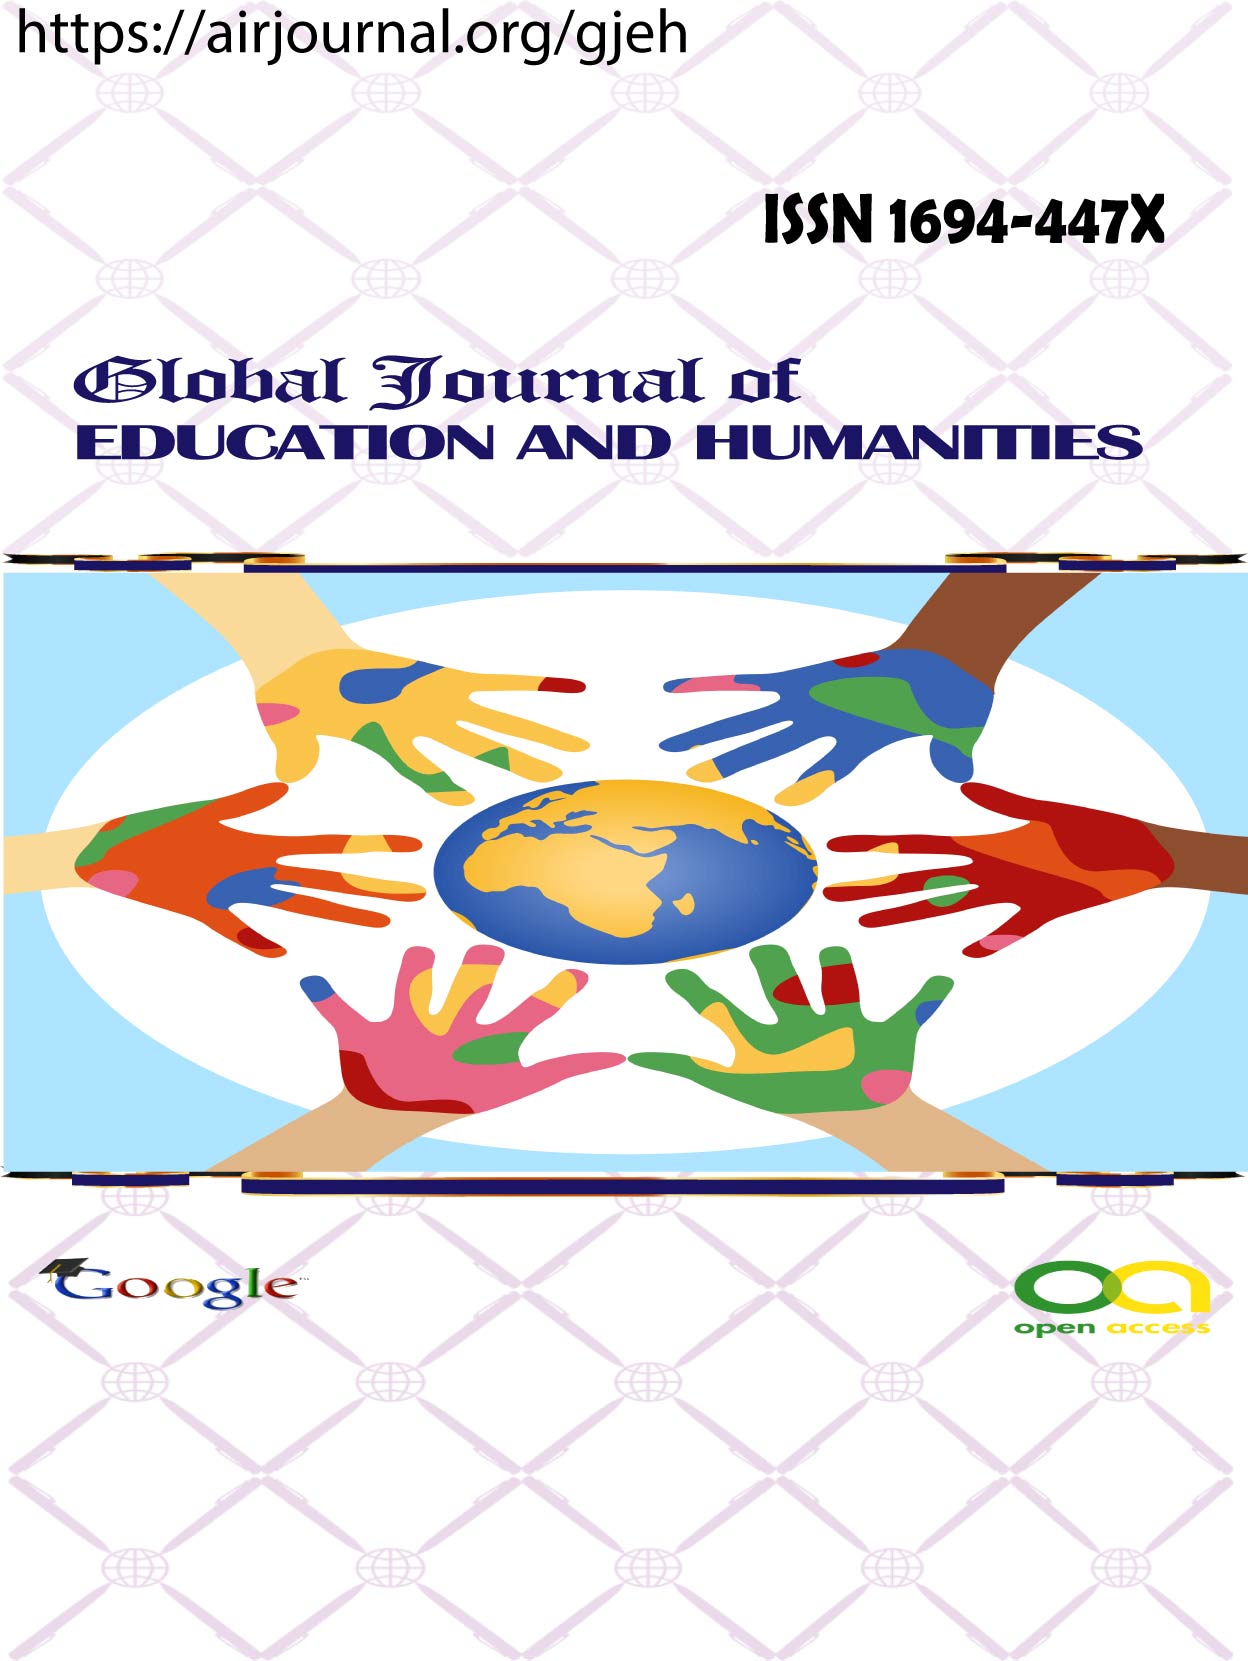 Global Journal of Education and Humanities